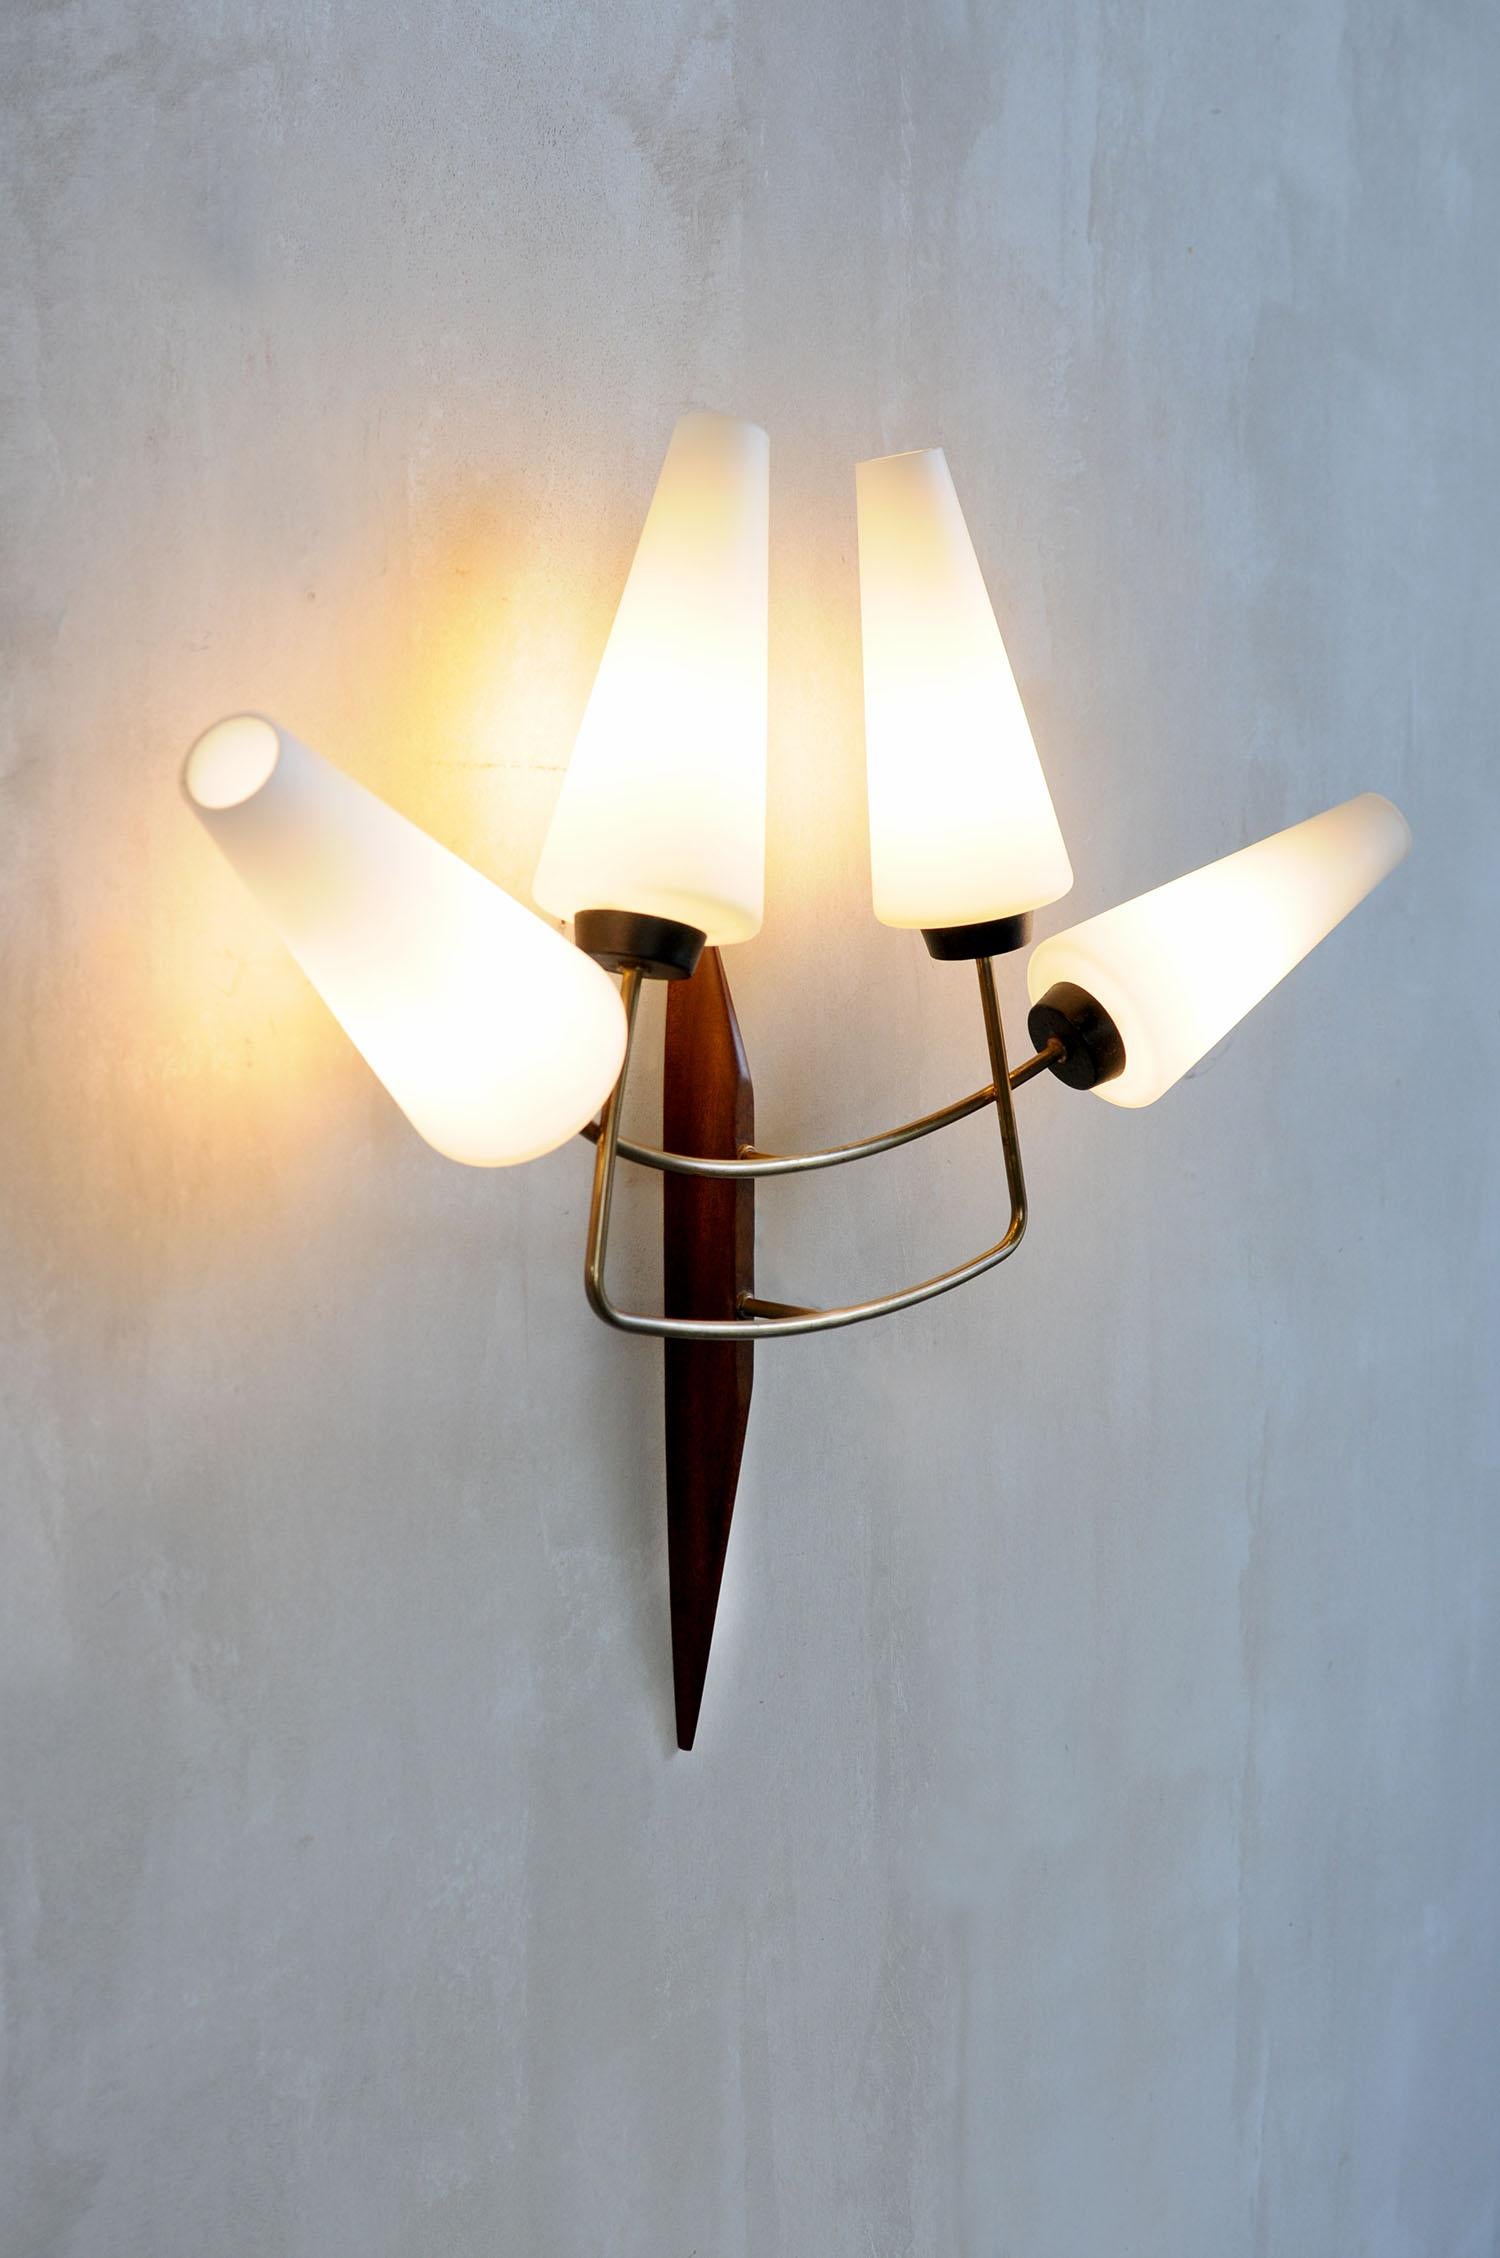 Maison Lunel, Large Wall Lamp with 4 Lights, France 1960 For Sale 1